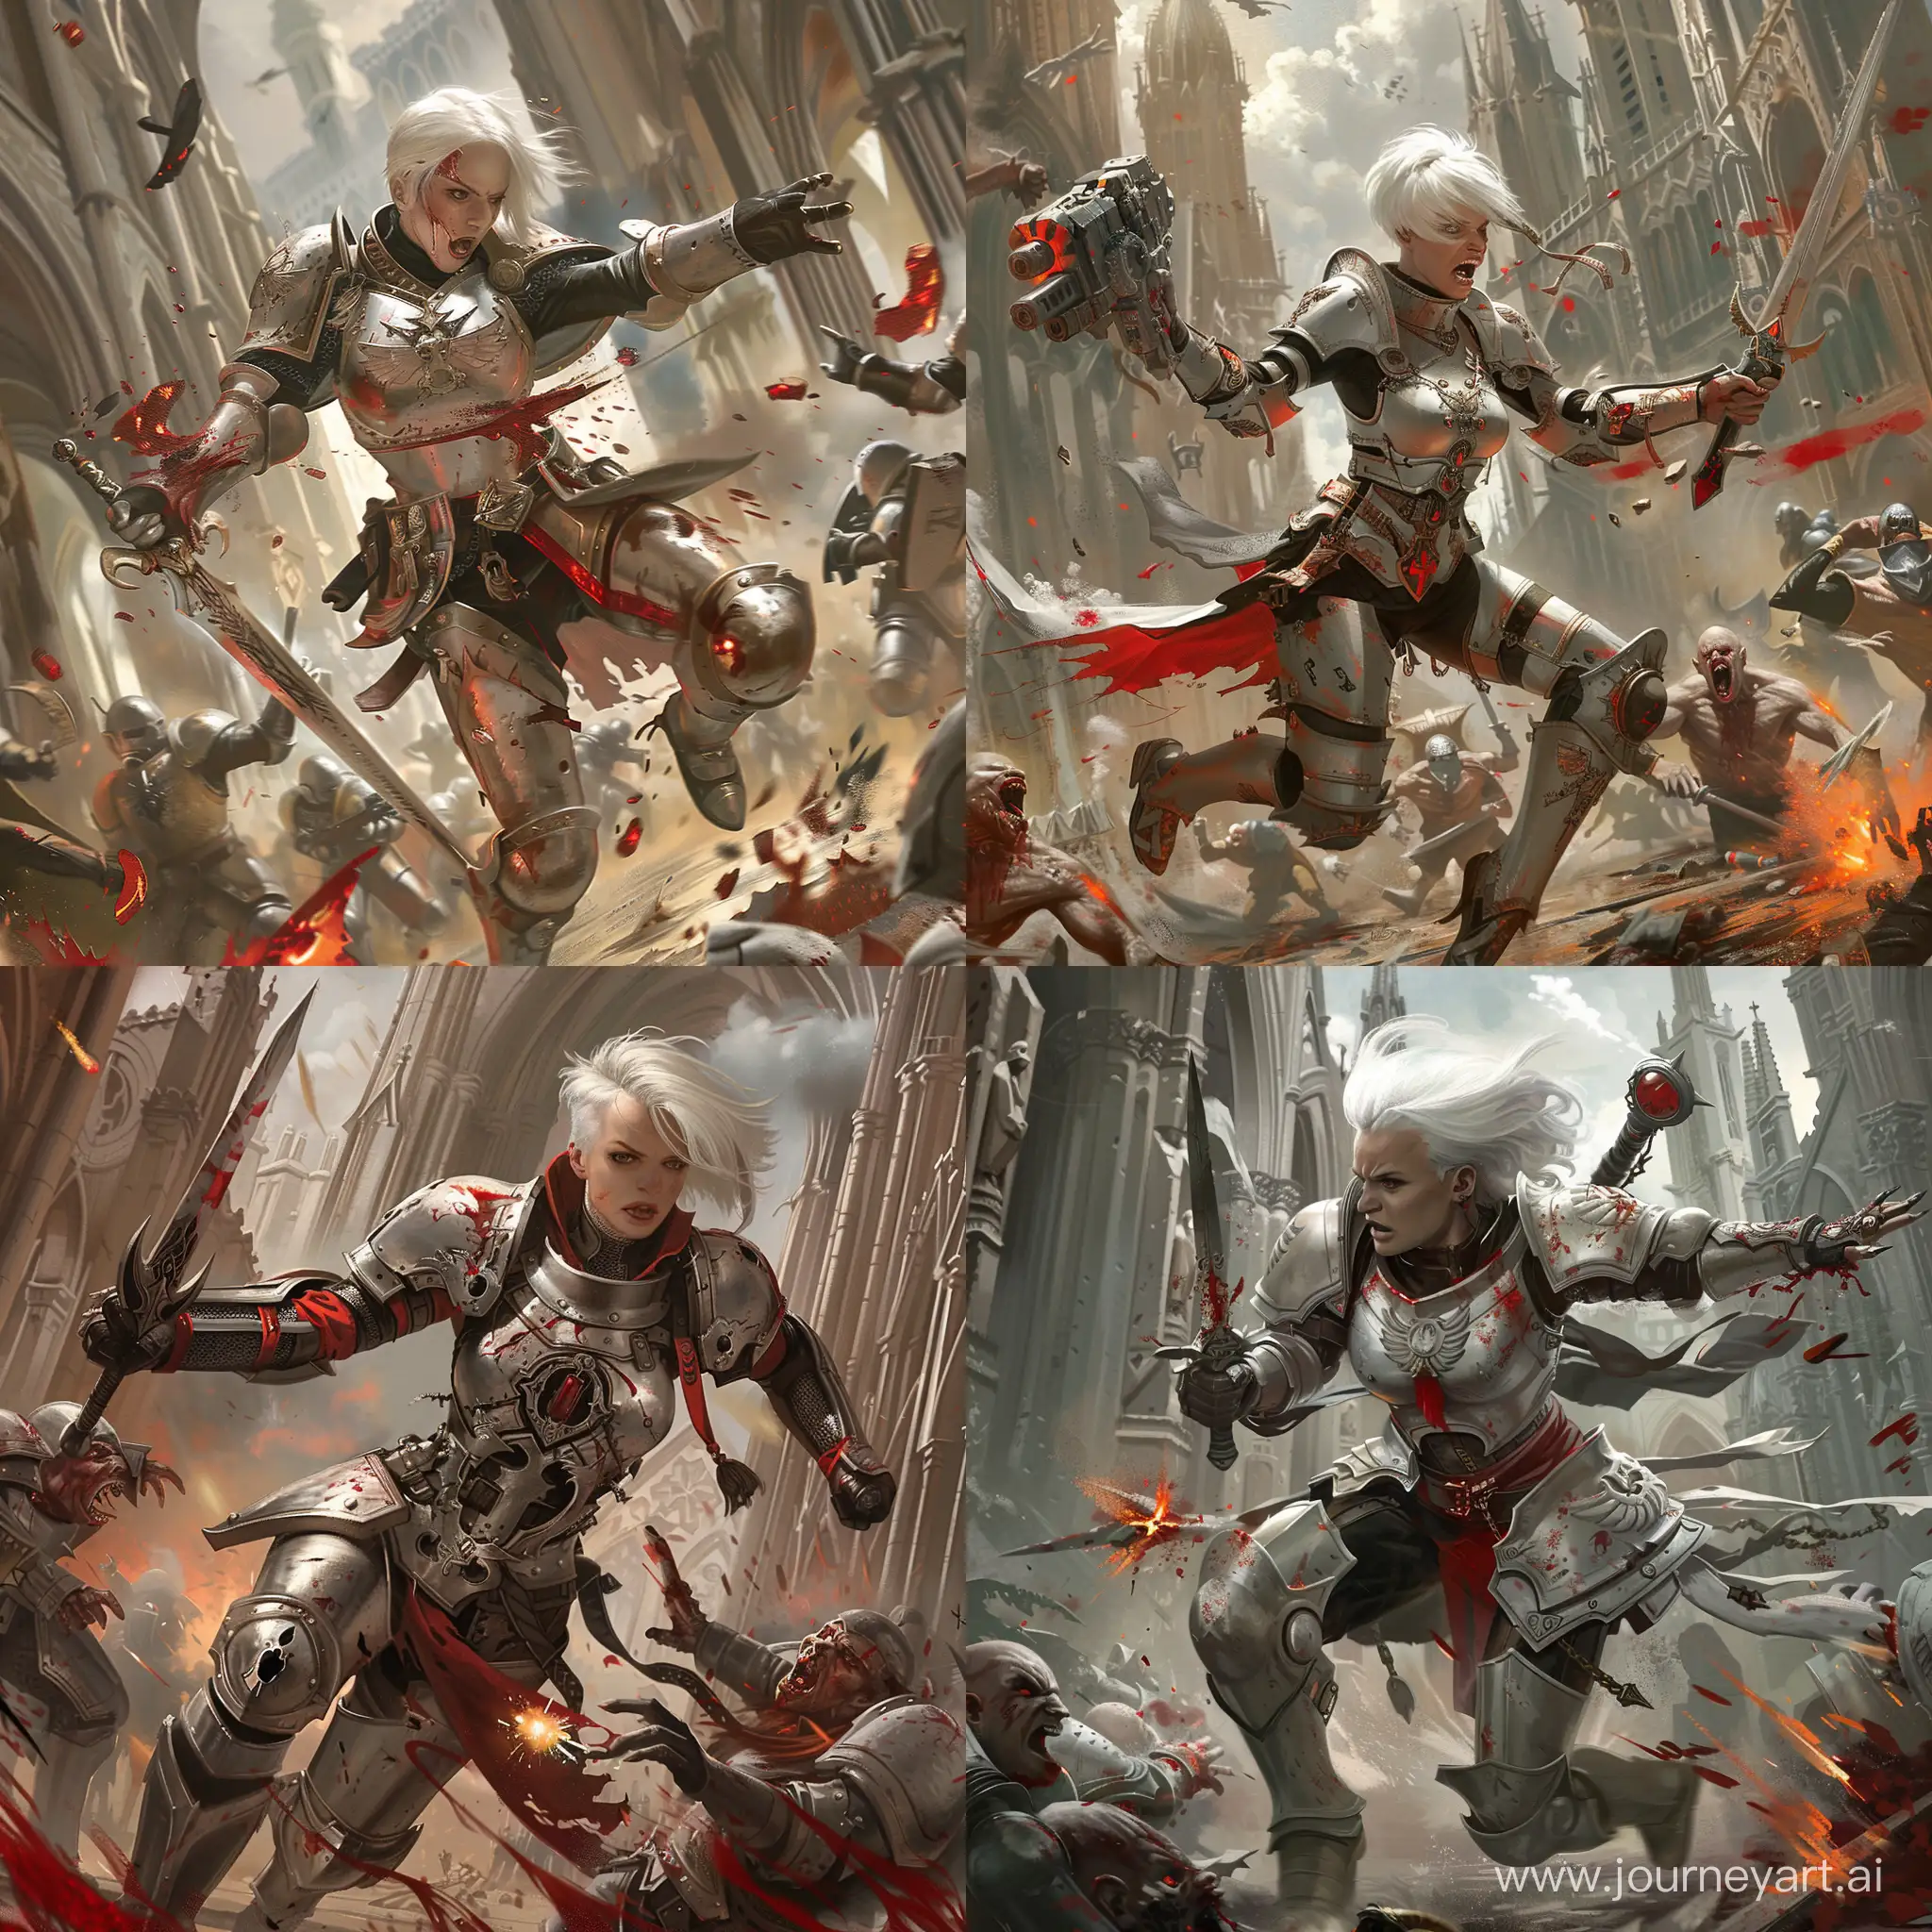 Adepta-Sororitas-Warrior-Battling-Chaos-Cultists-in-Gothic-Cathedral-Ruins